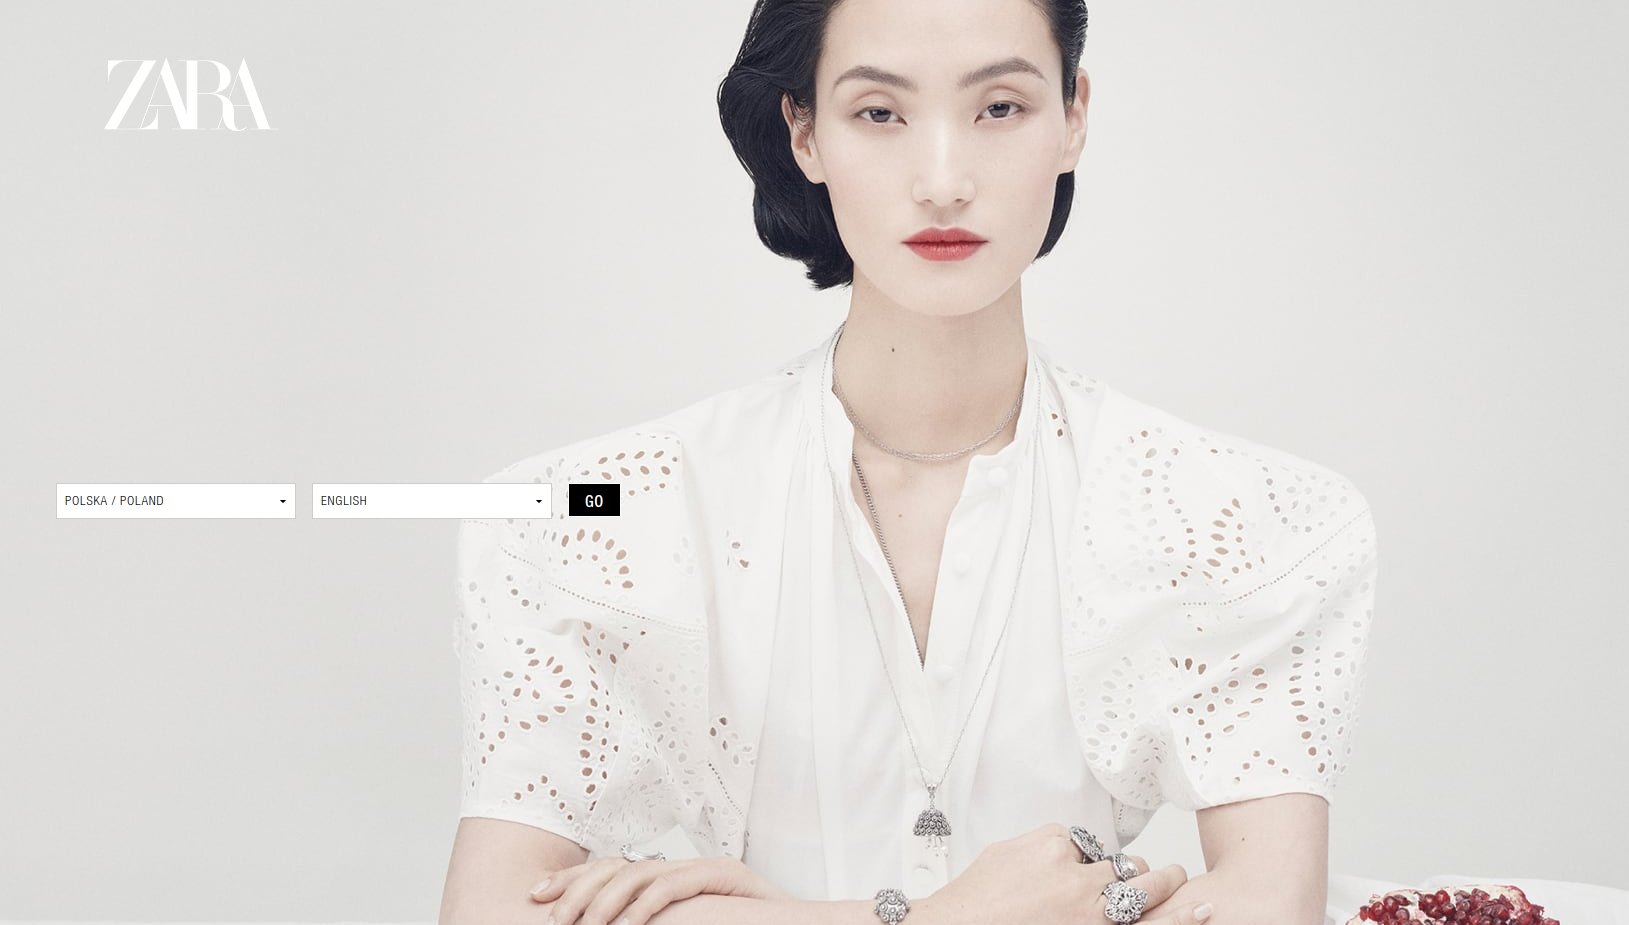 The Zara welcome page is a perfect example of a splash page